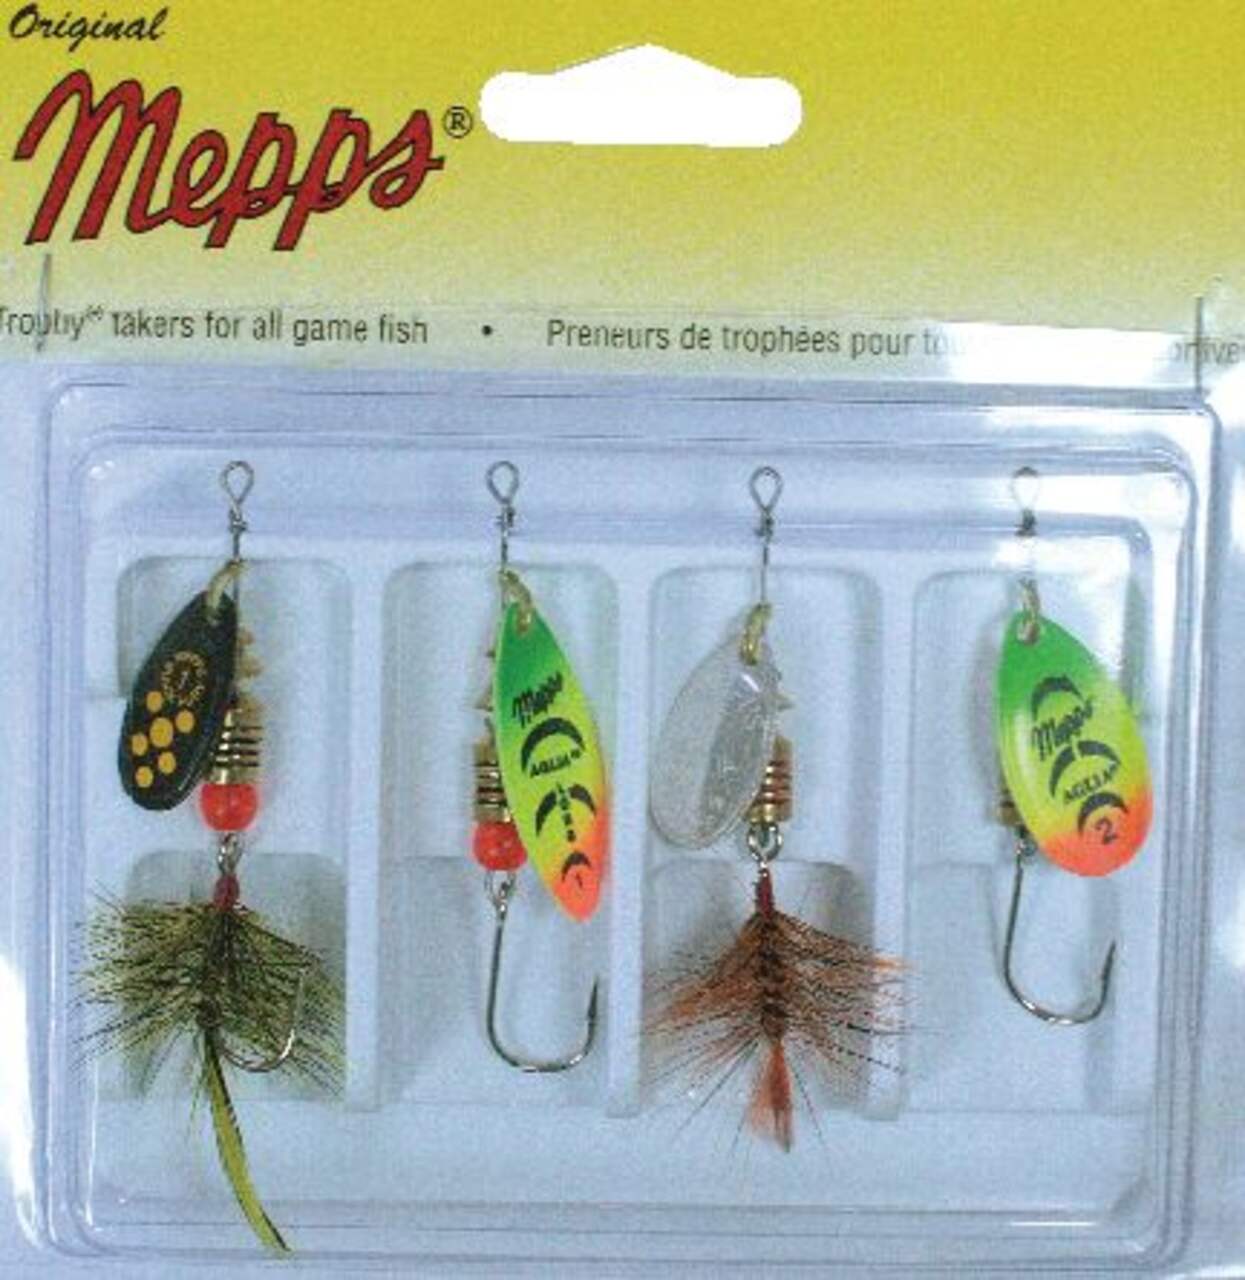 https://media-www.canadiantire.ca/product/playing/fishing/fishing-lures/0777903/trophy-trout-kit-4-pack-66622331-ce3d-45a9-8793-14f64695eb48-jpgrendition.jpg?imdensity=1&imwidth=640&impolicy=mZoom